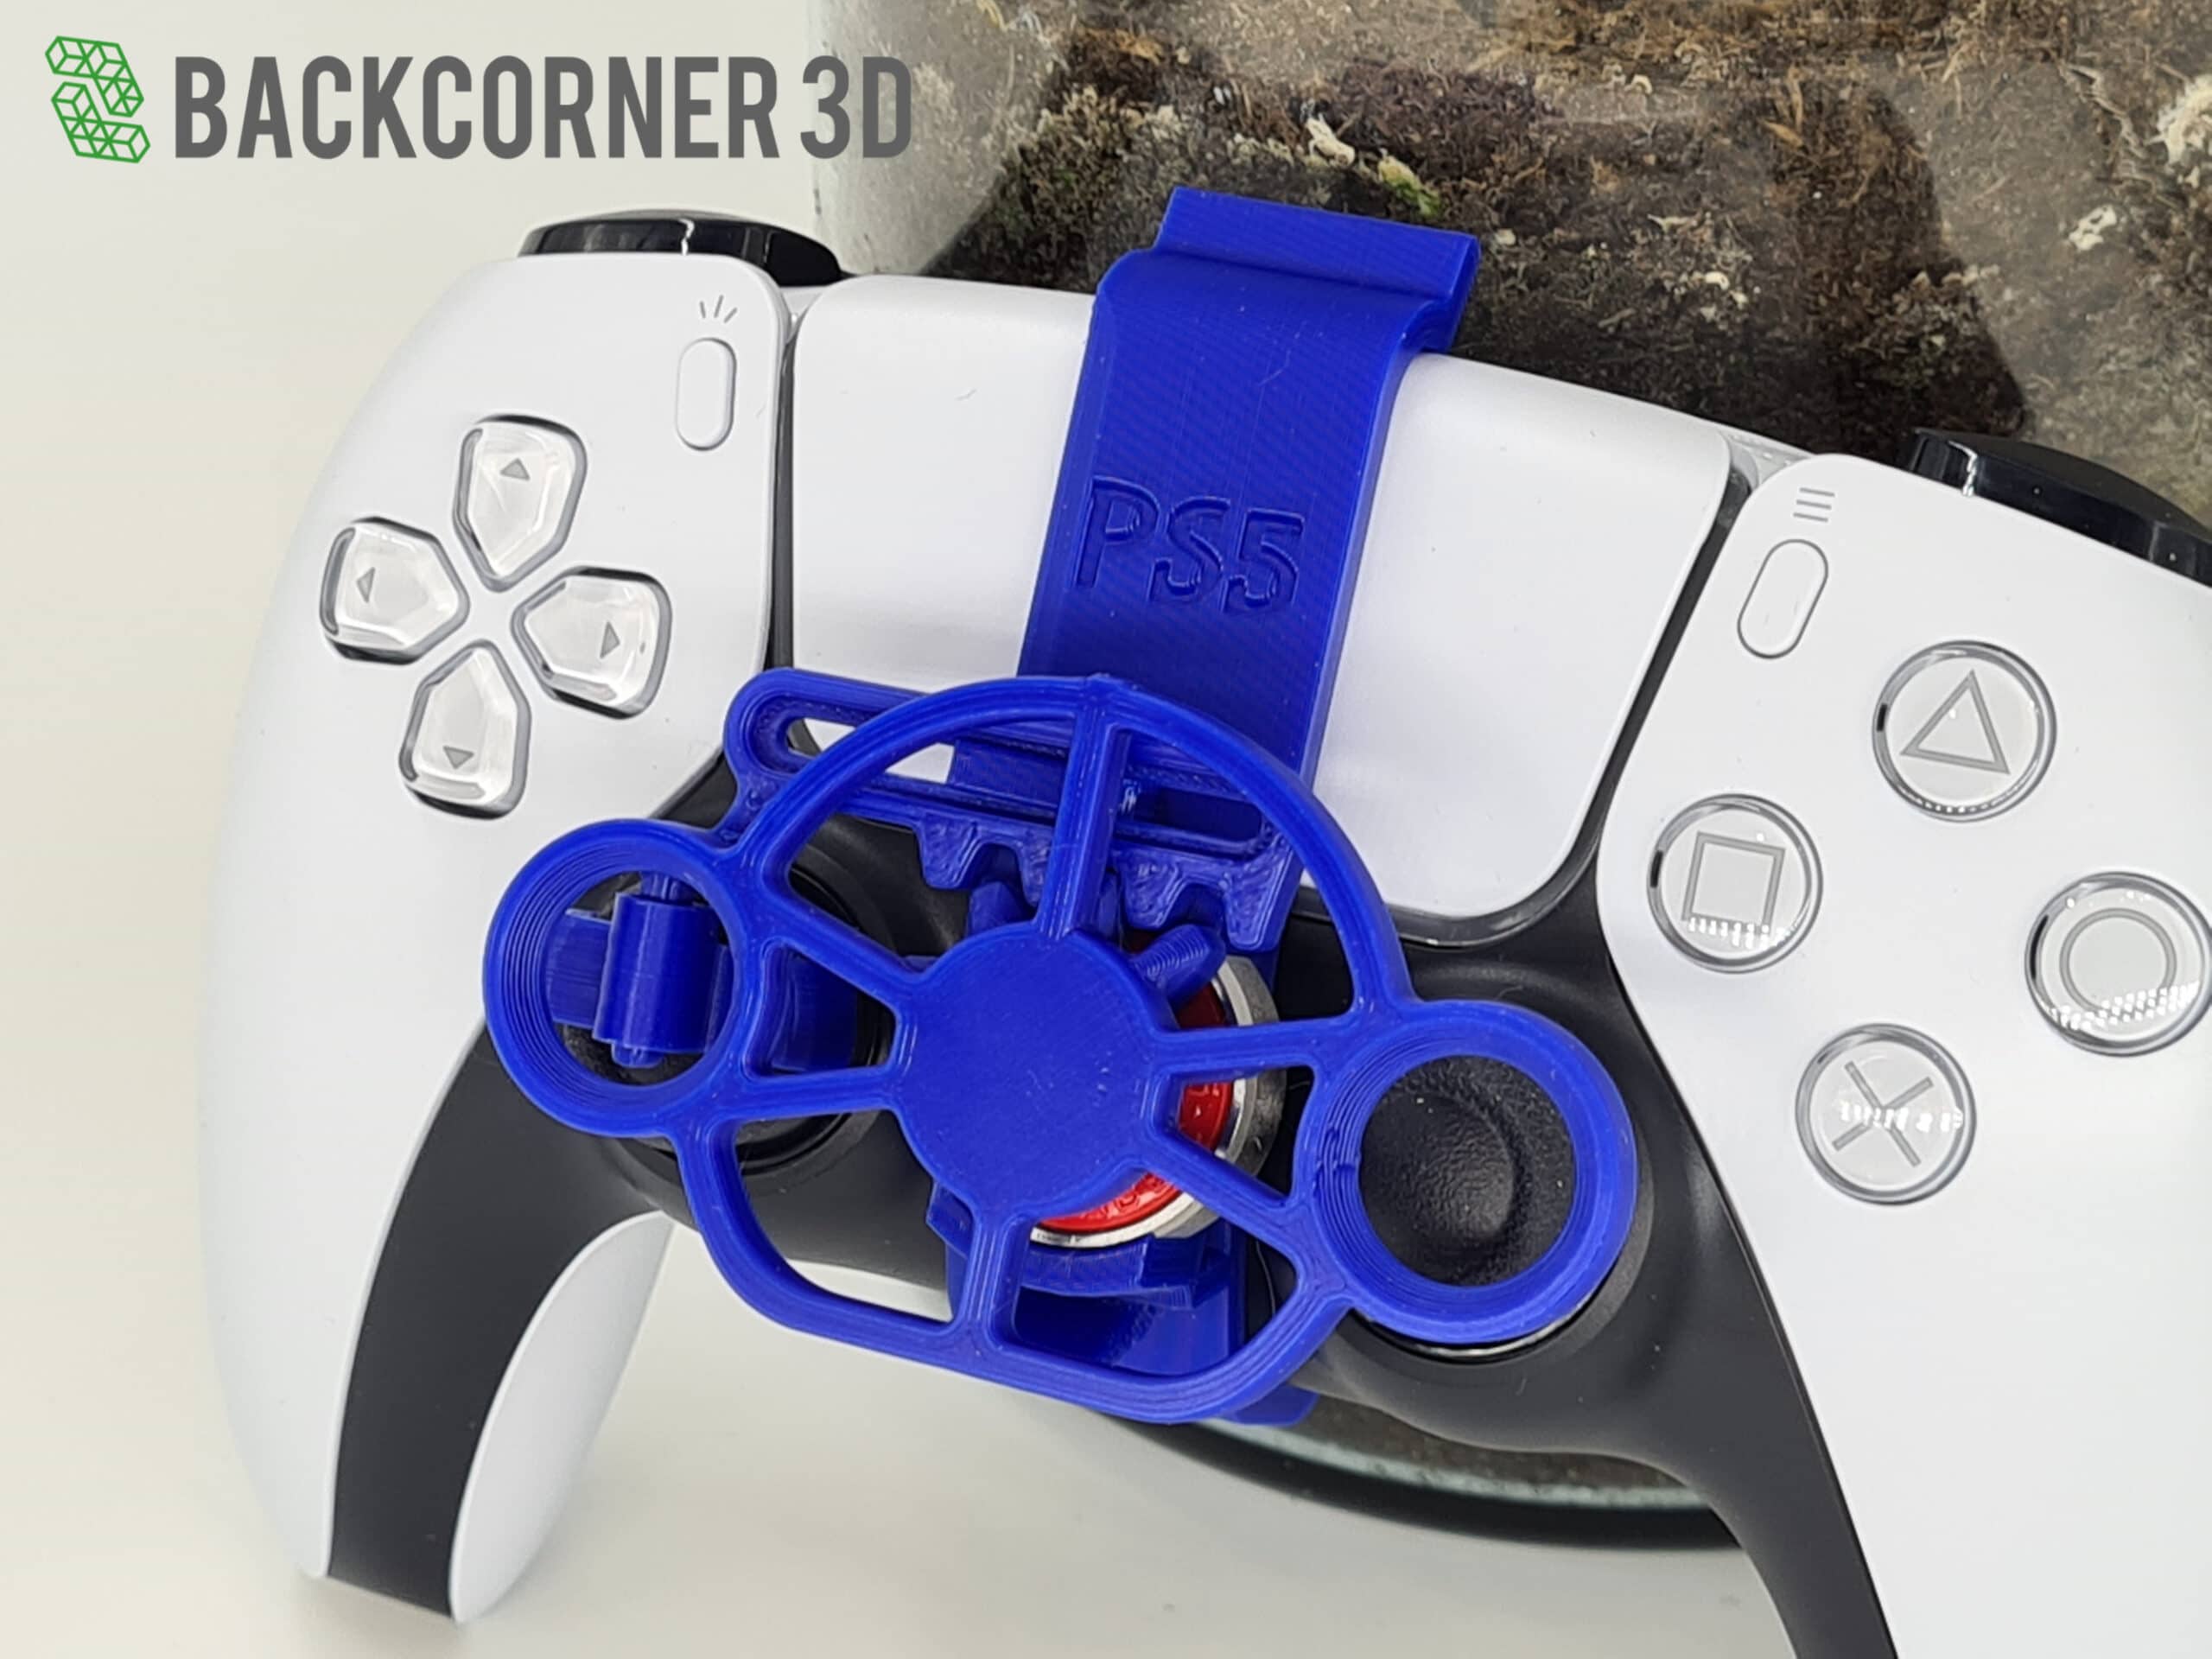 PS5 Wheels, Gamepads, Joysticks and Accessories